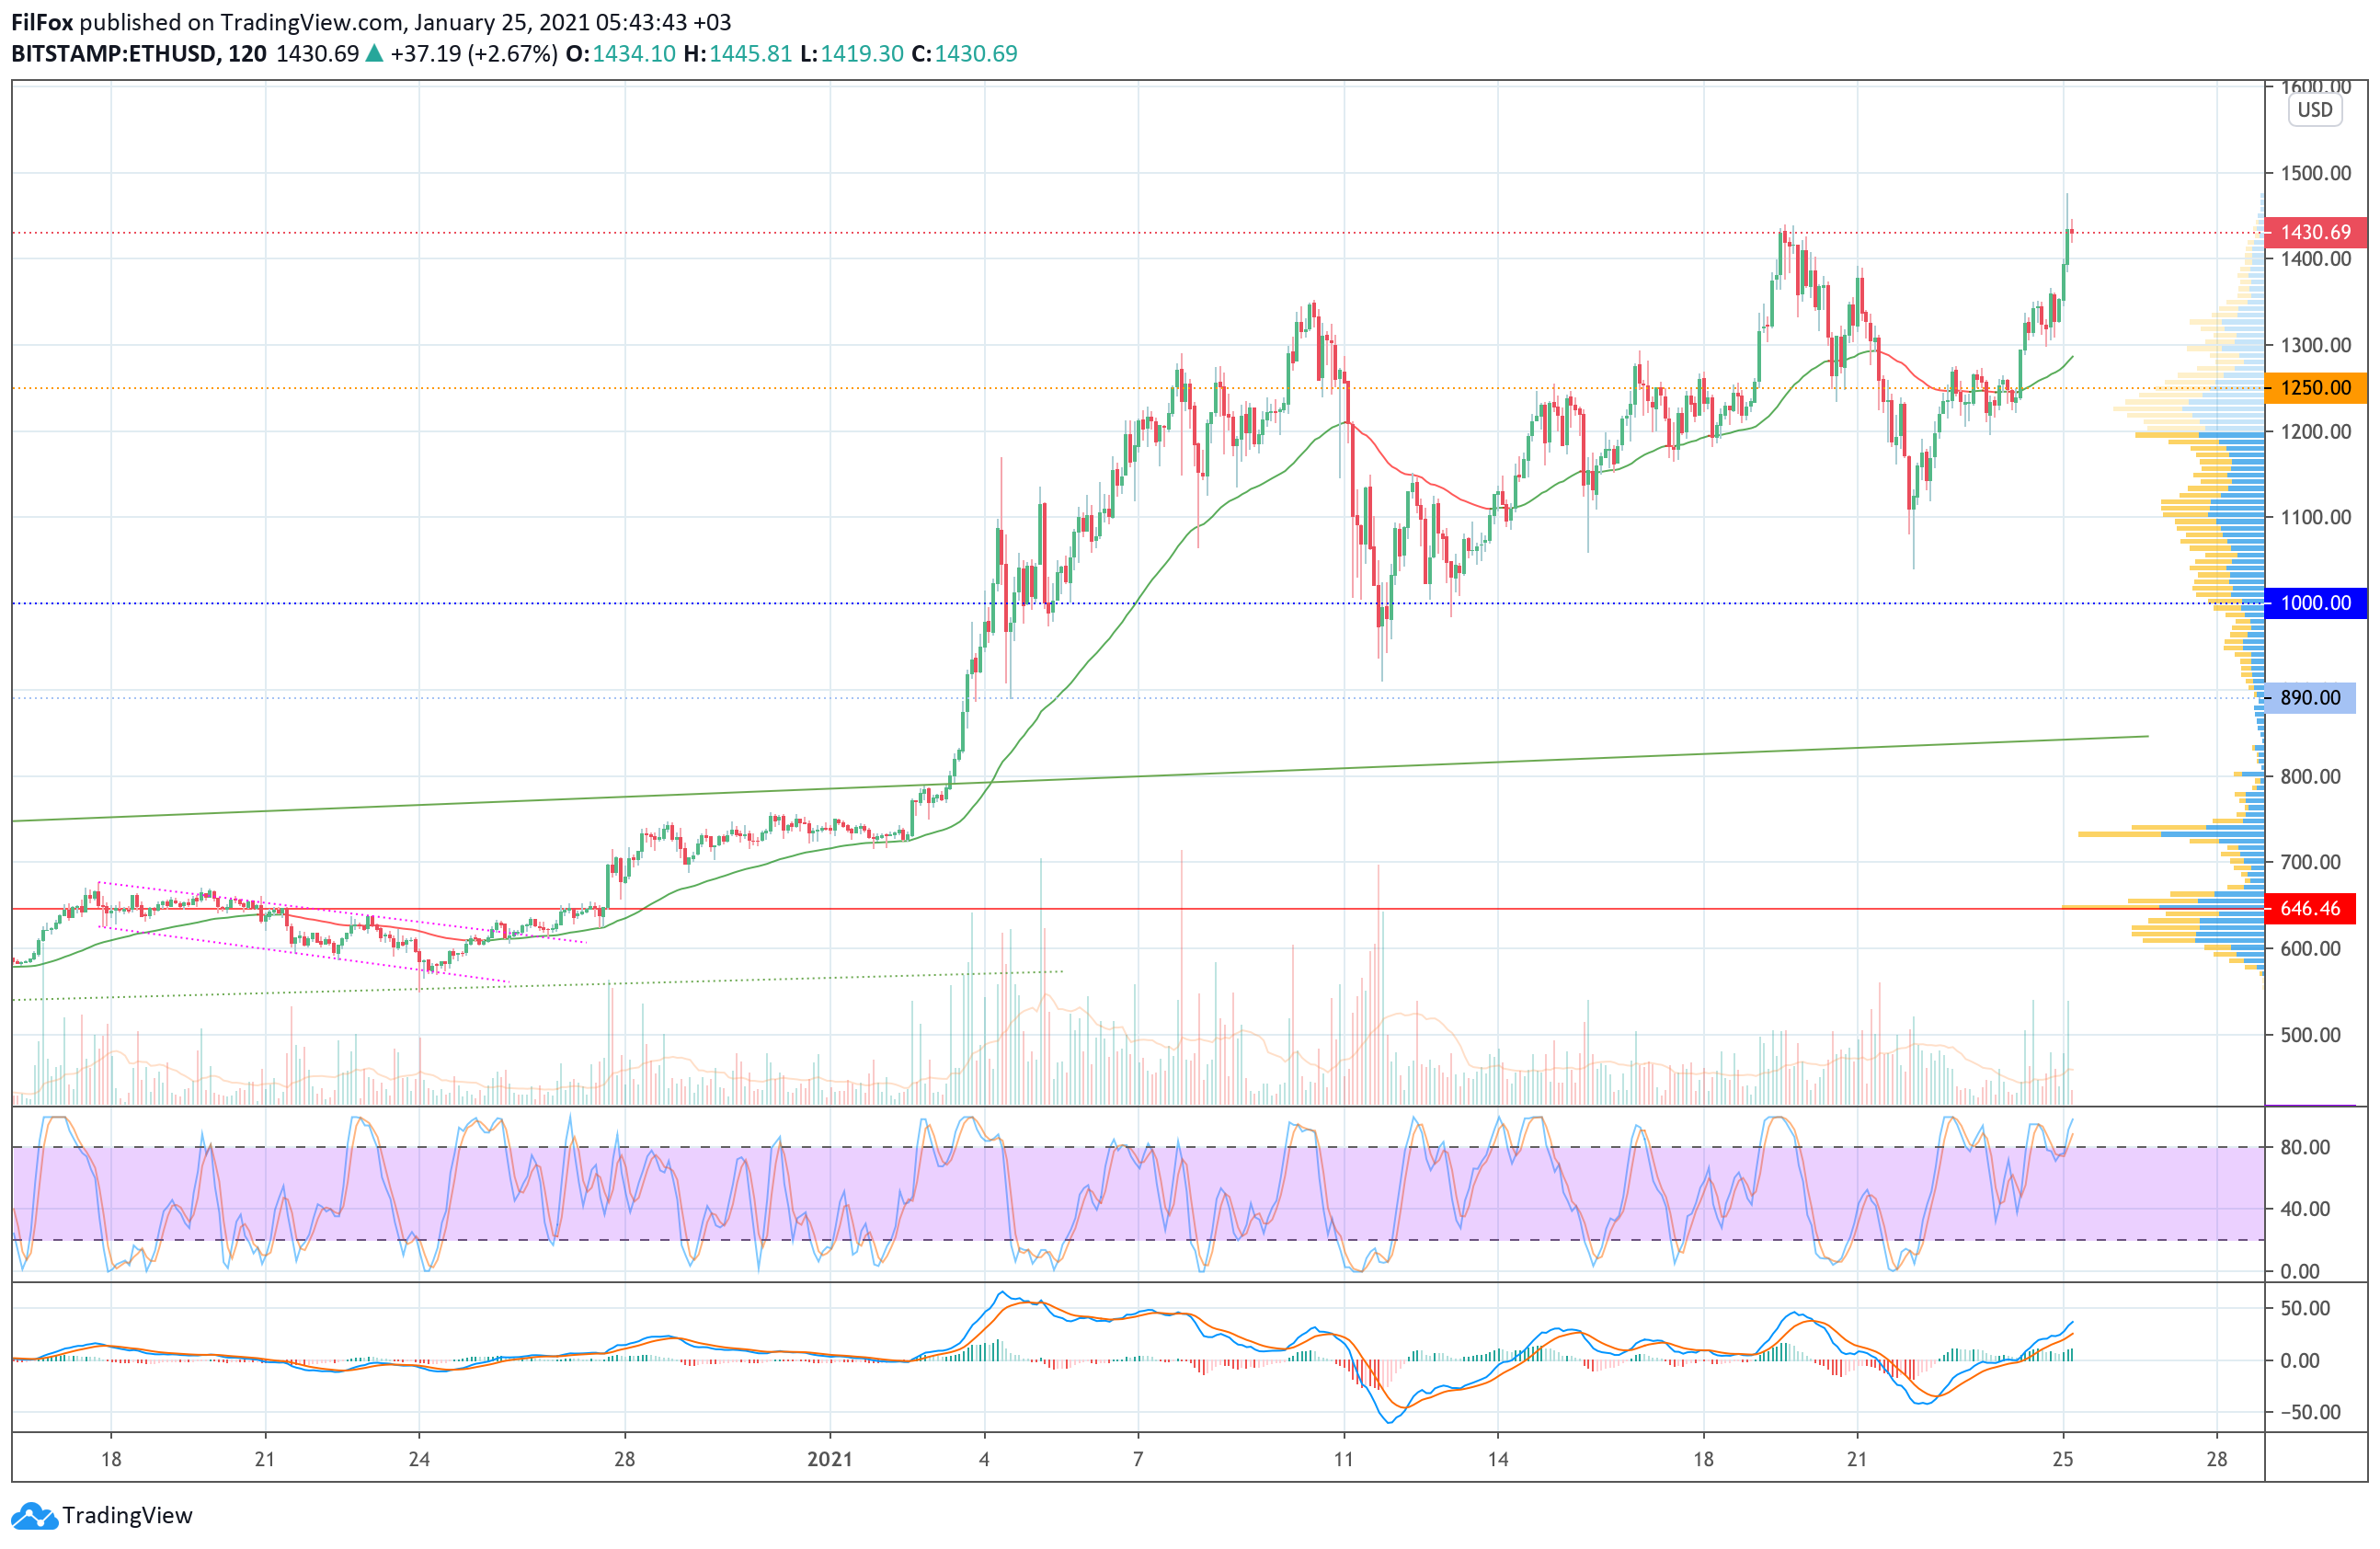 Analysis of prices for Bitcoin, Ethereum, Ripple for 01/25/2021